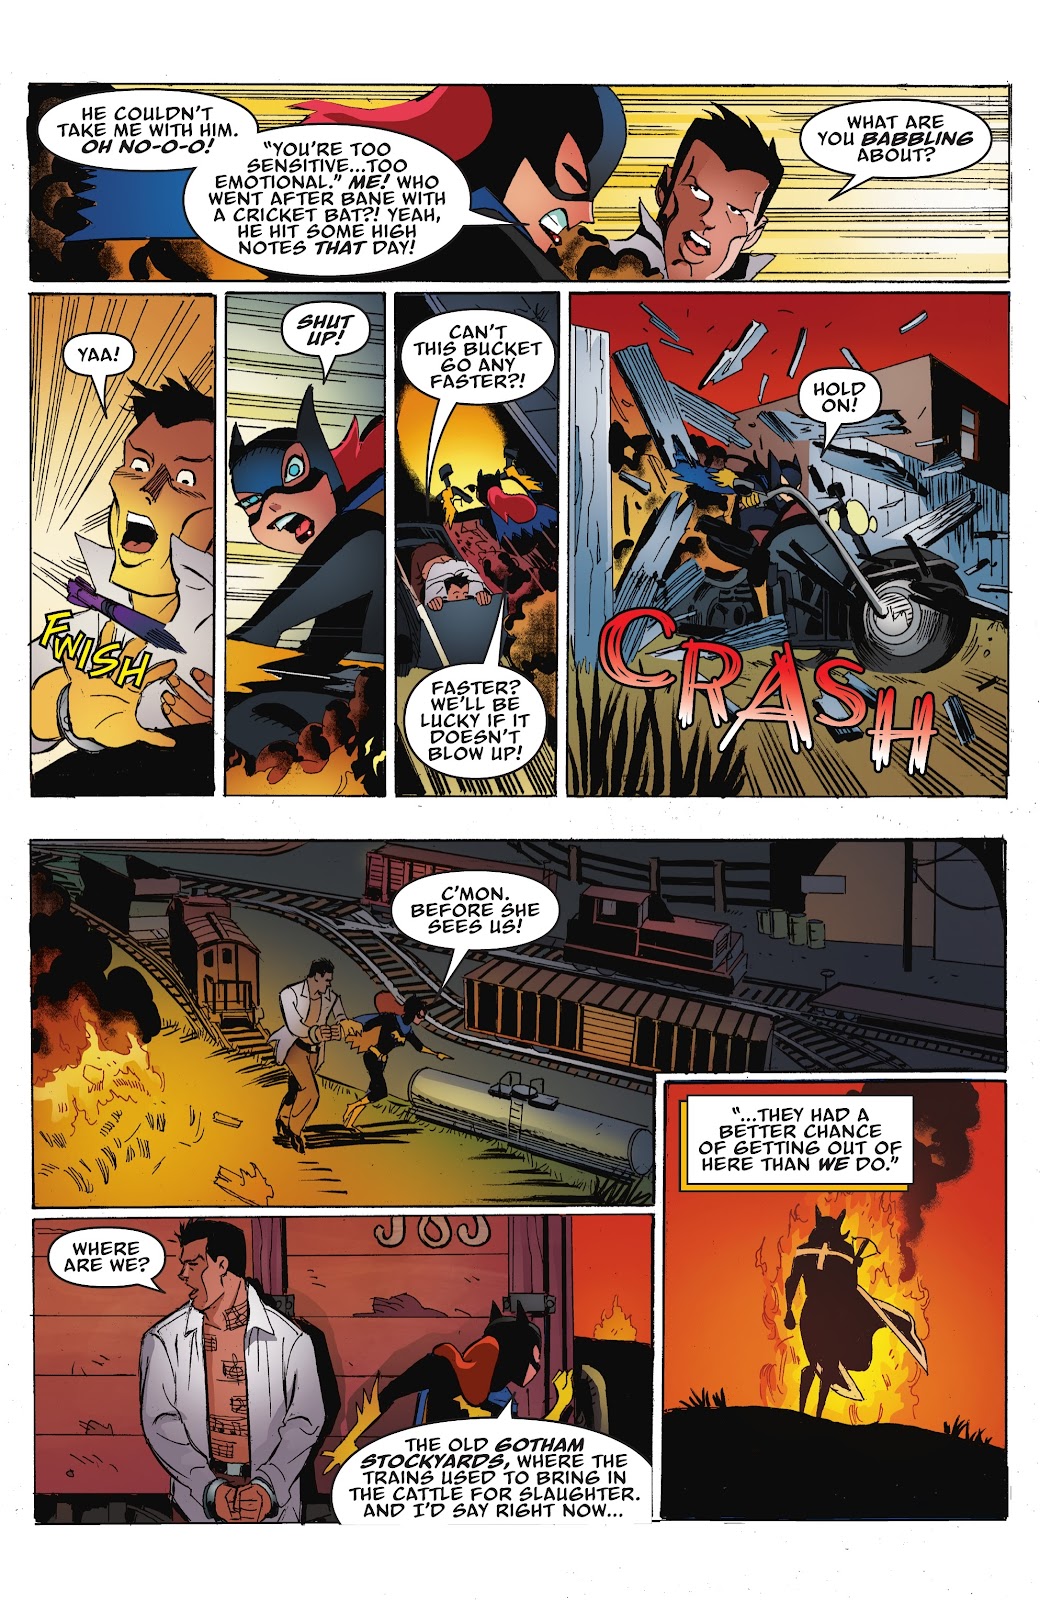 Batman: The Adventures Continue: Season Two issue 3 - Page 12